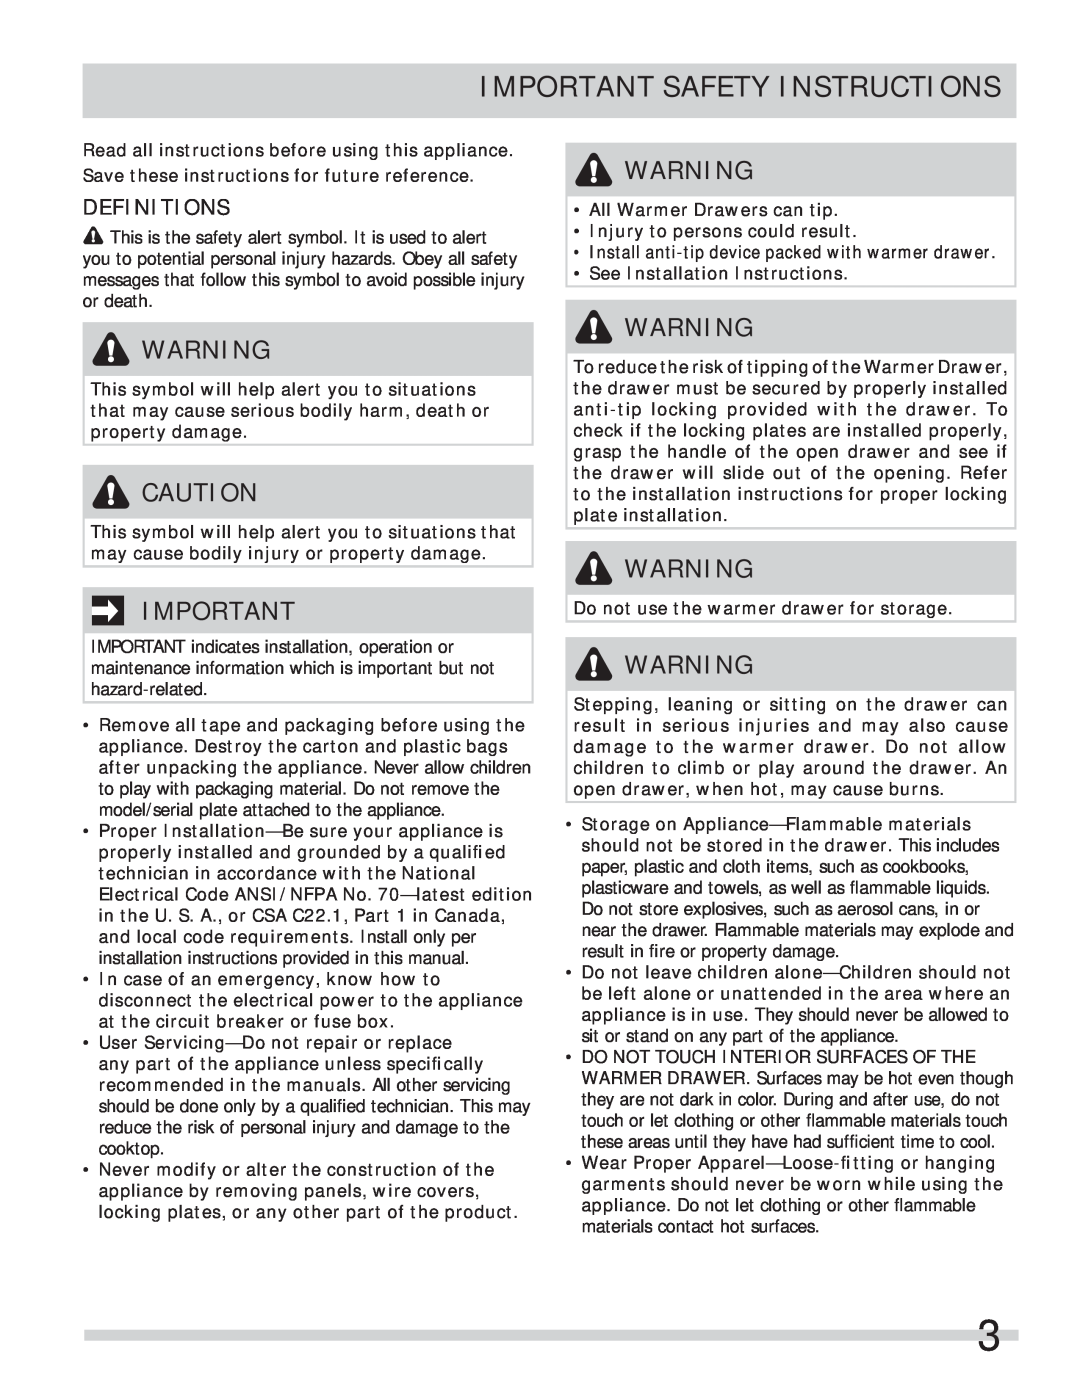 Frigidaire 318201028 important safety instructions Important Safety Instructions, Definitions 